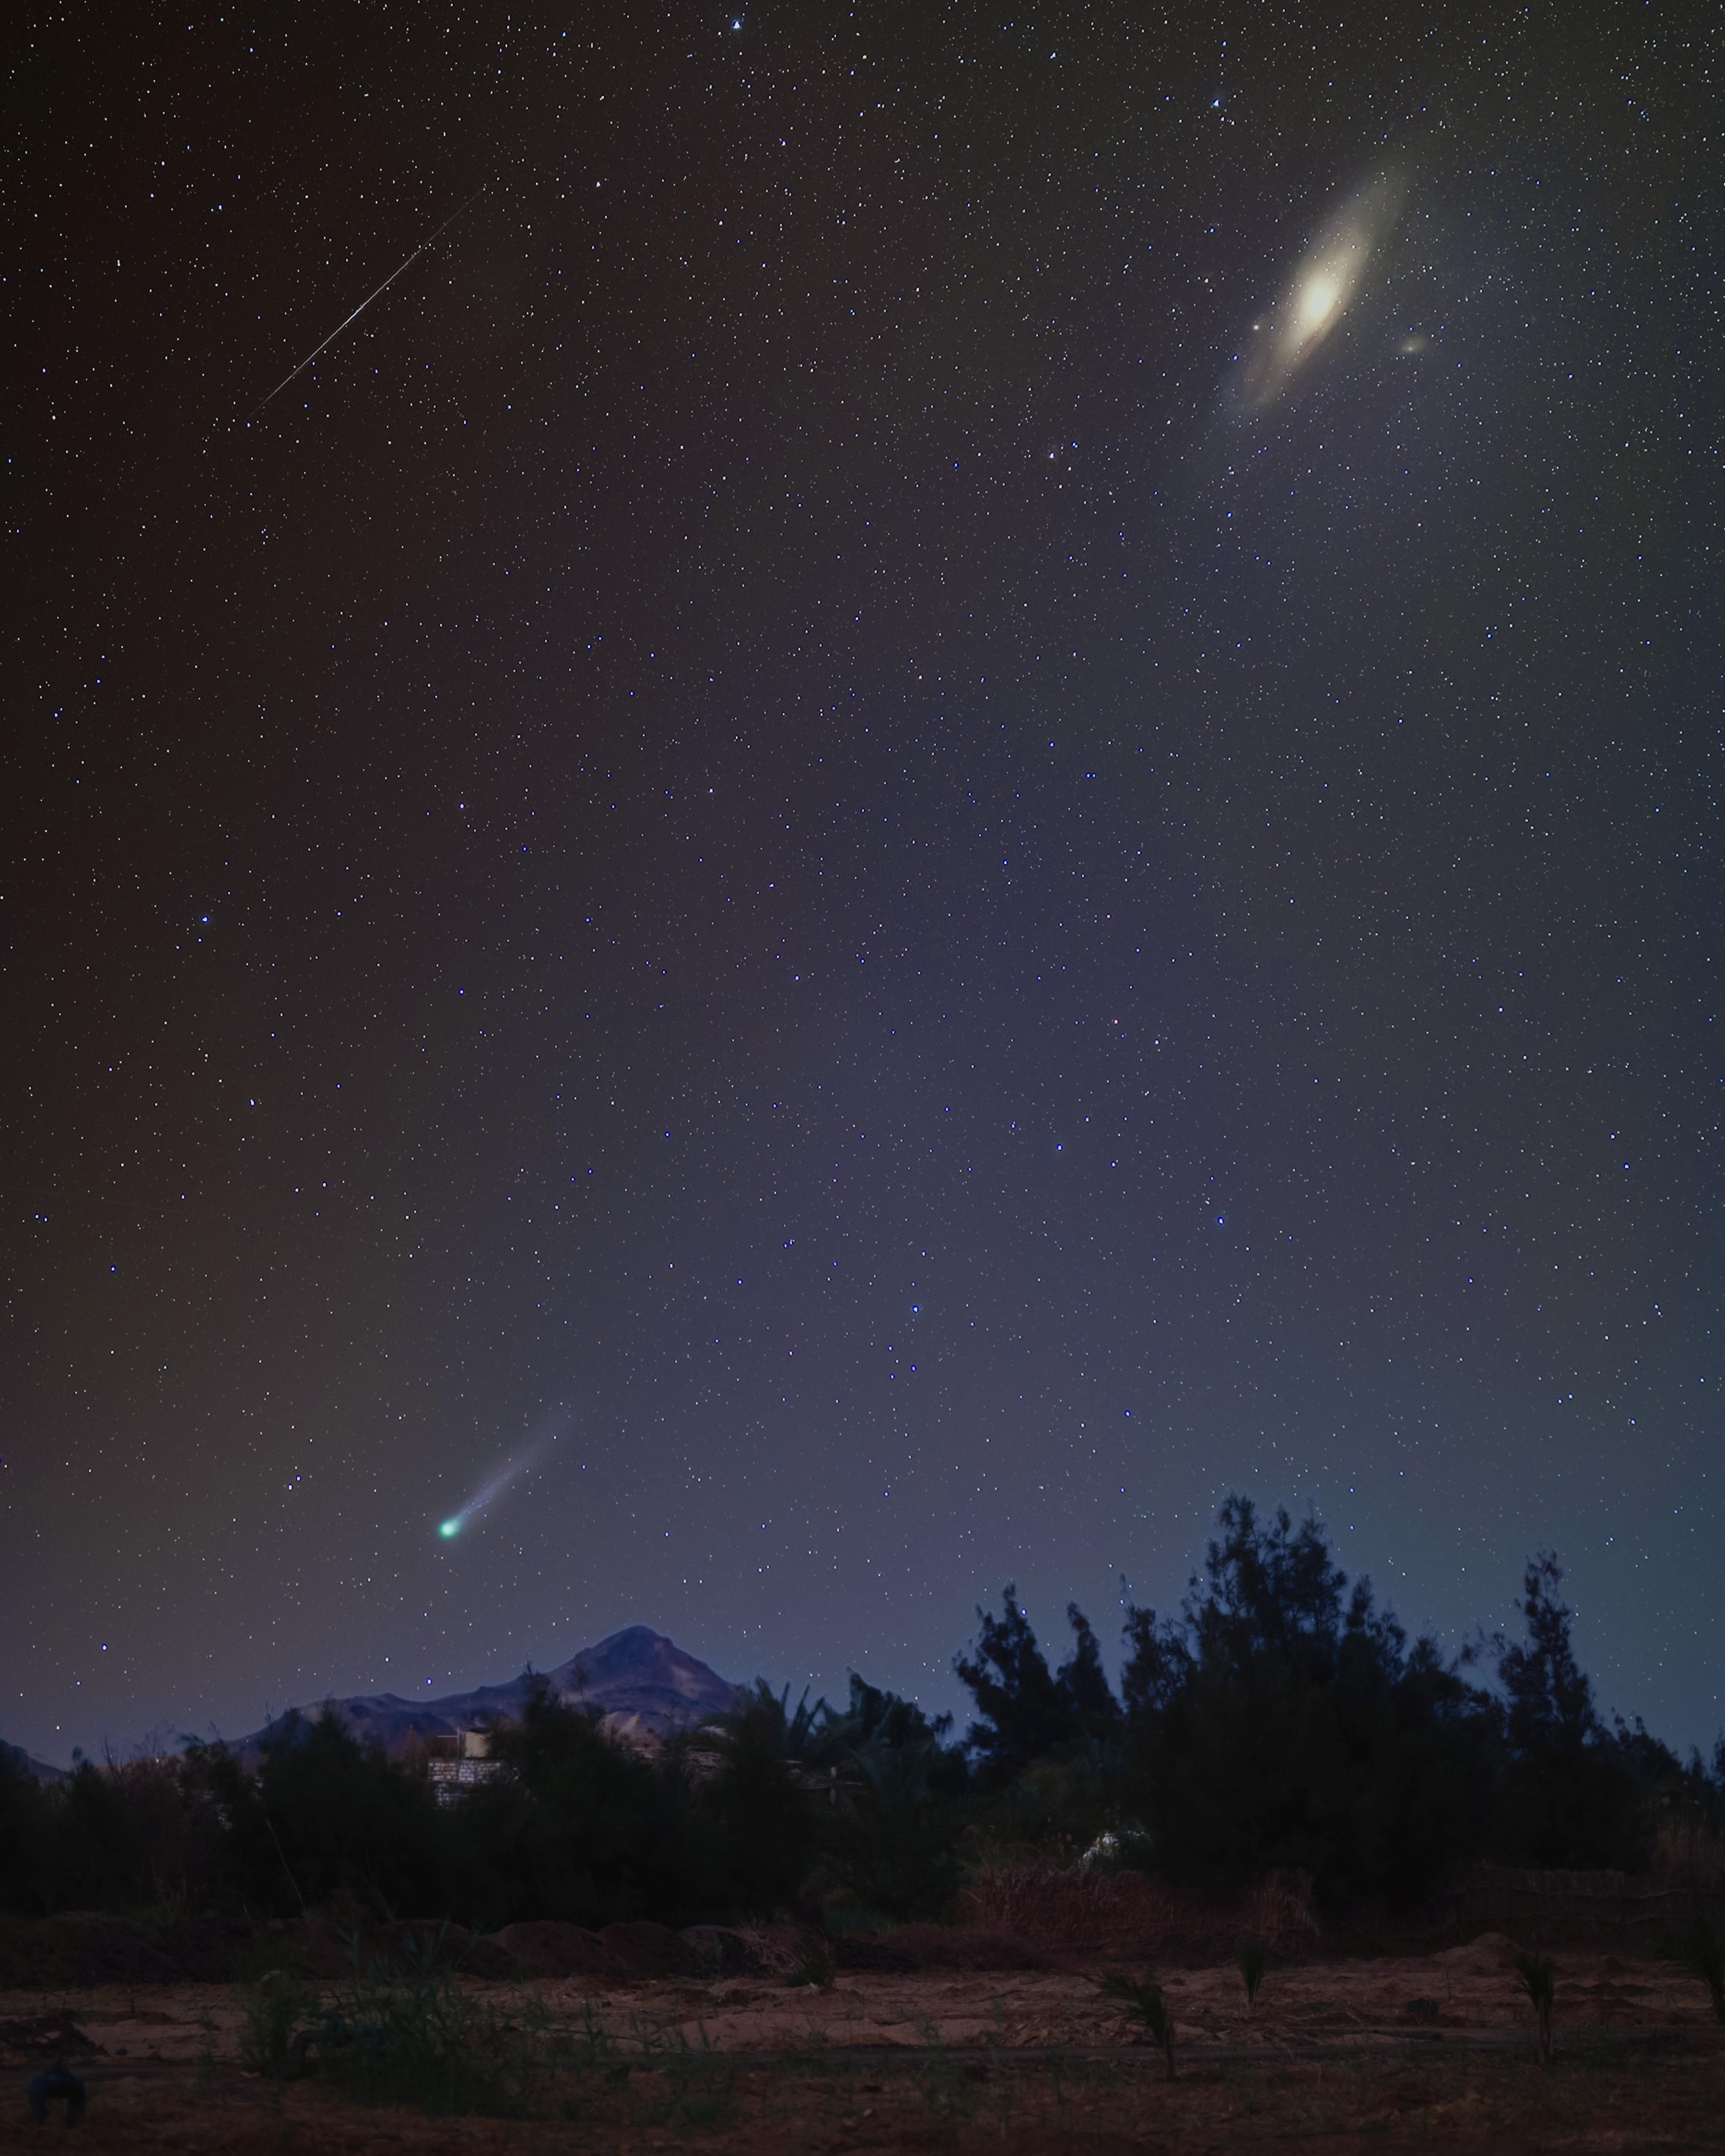 comet streaks across the sky and glows green, with a bright galaxy in the top left corner and a long thin meteor trail in the sky to the top left corner.